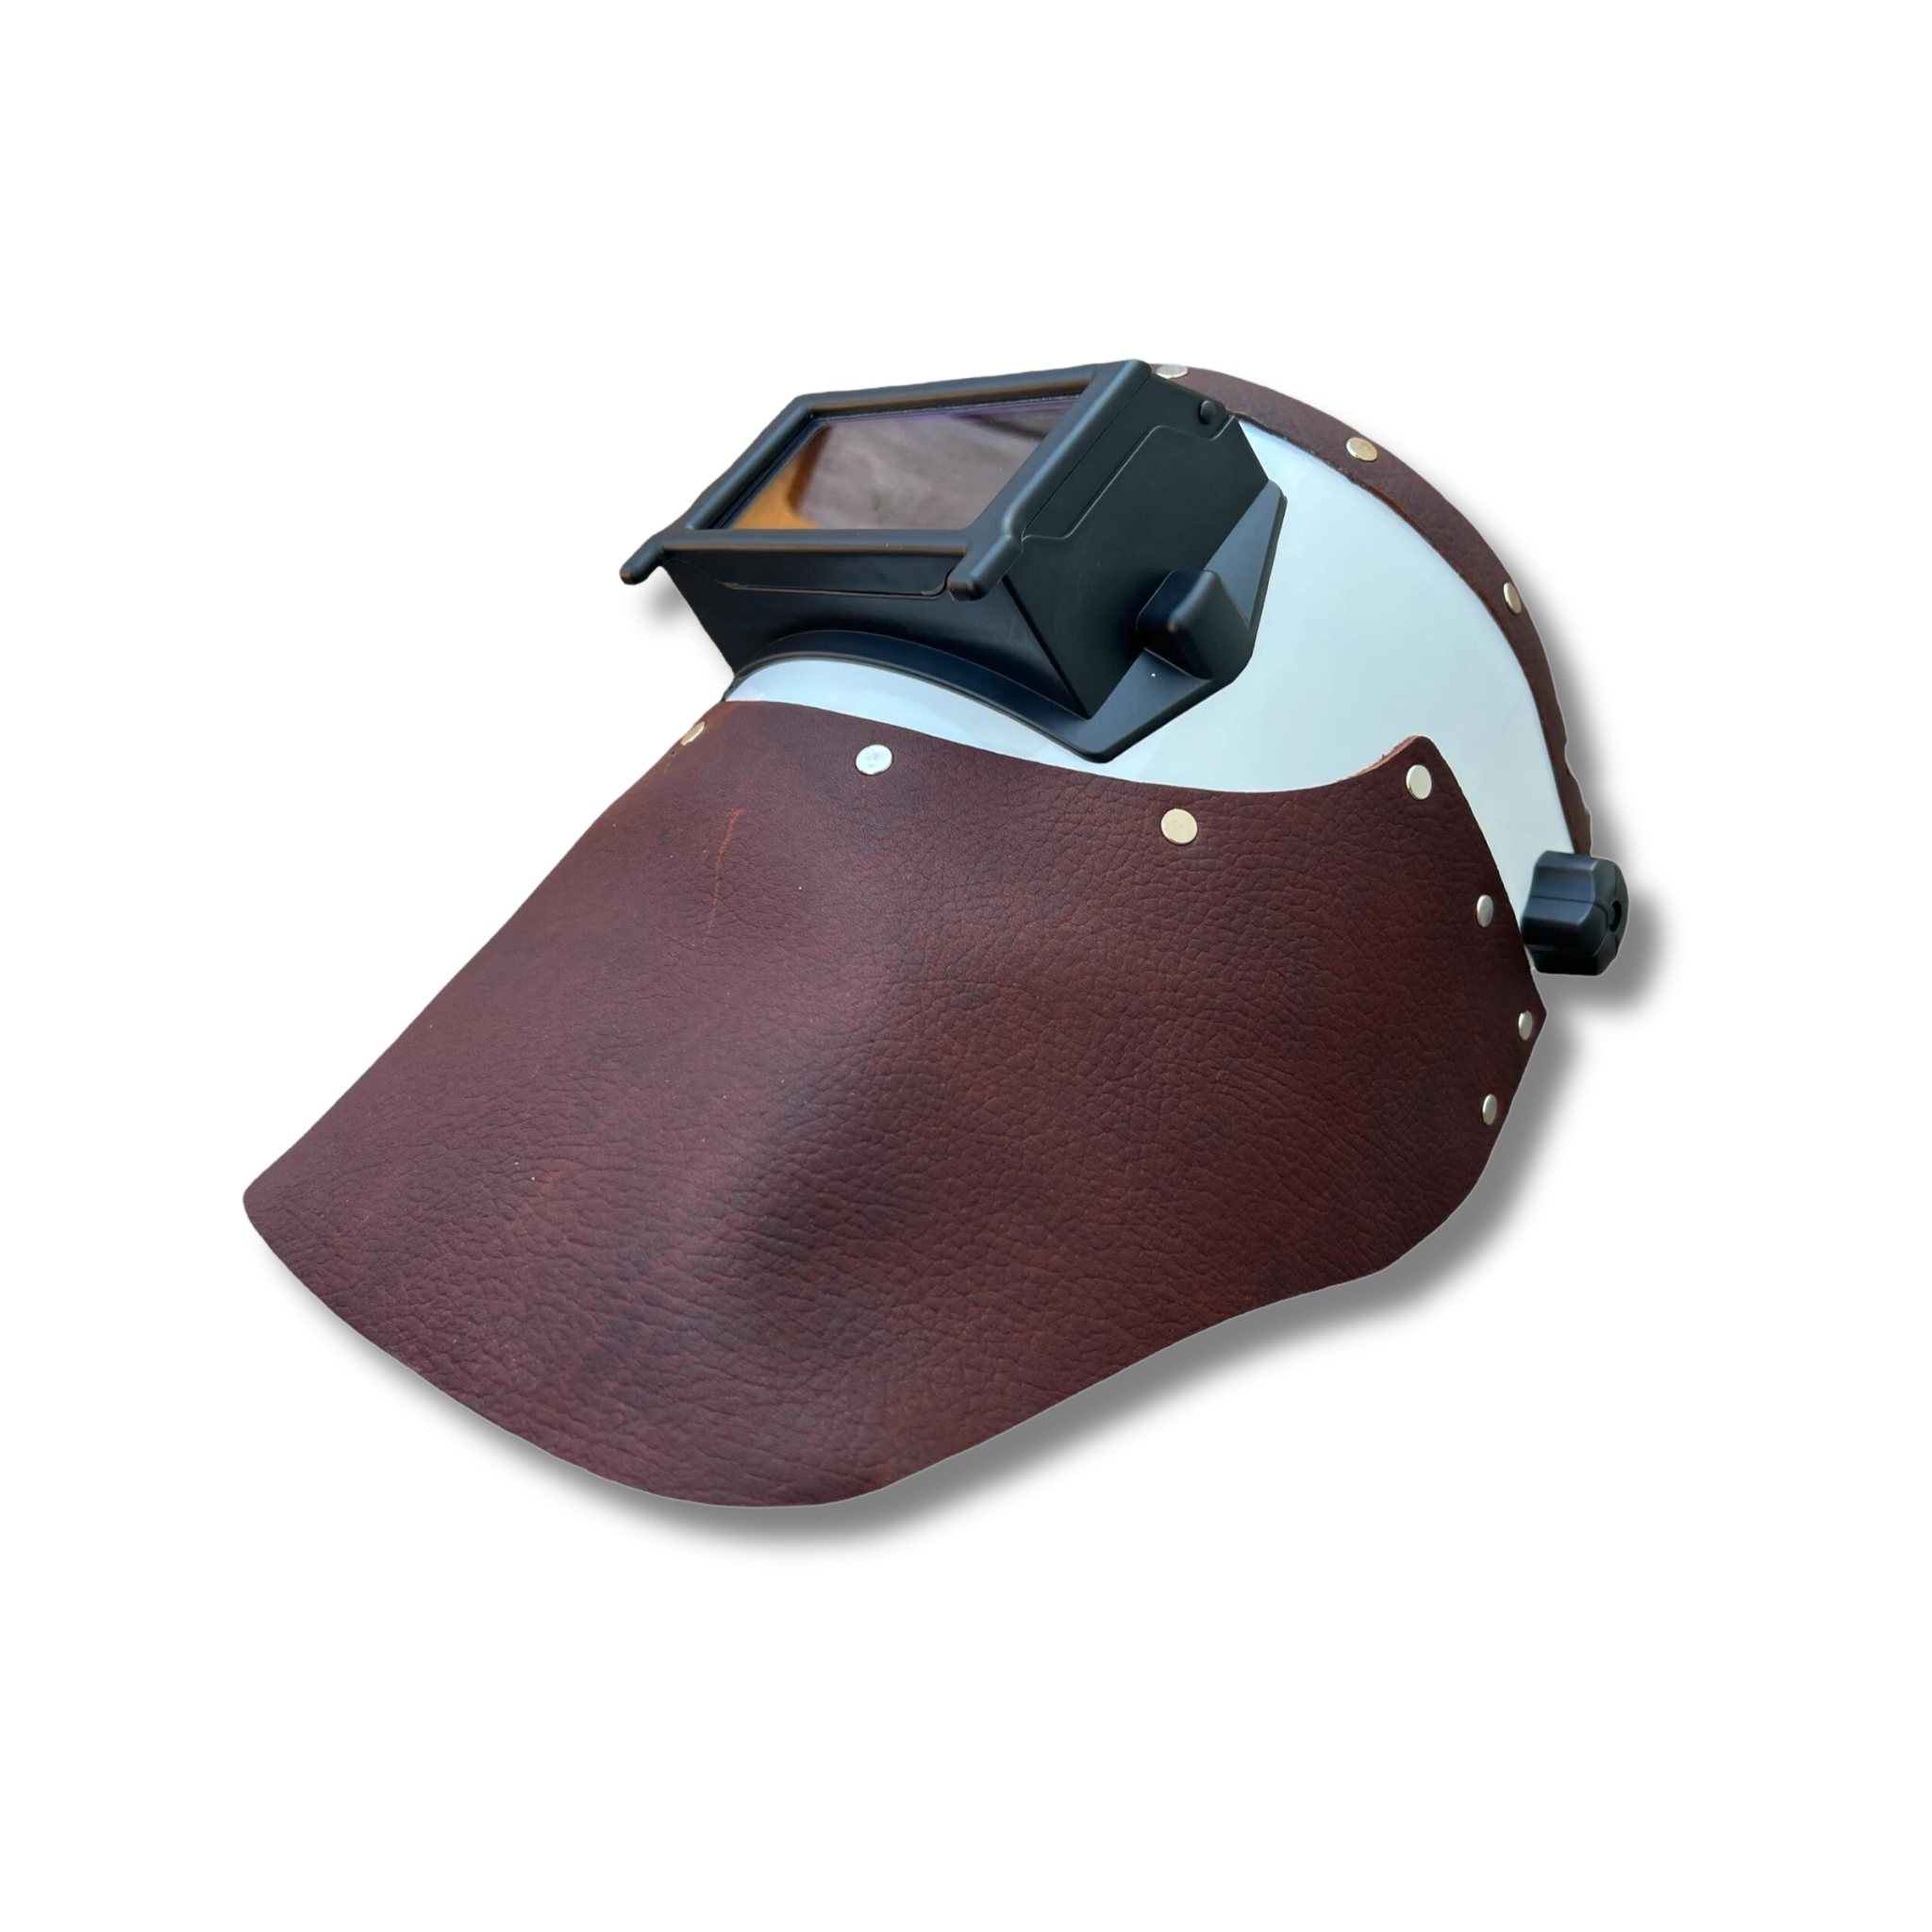 Outlaw Leather - Welding Hood - Brown Leather